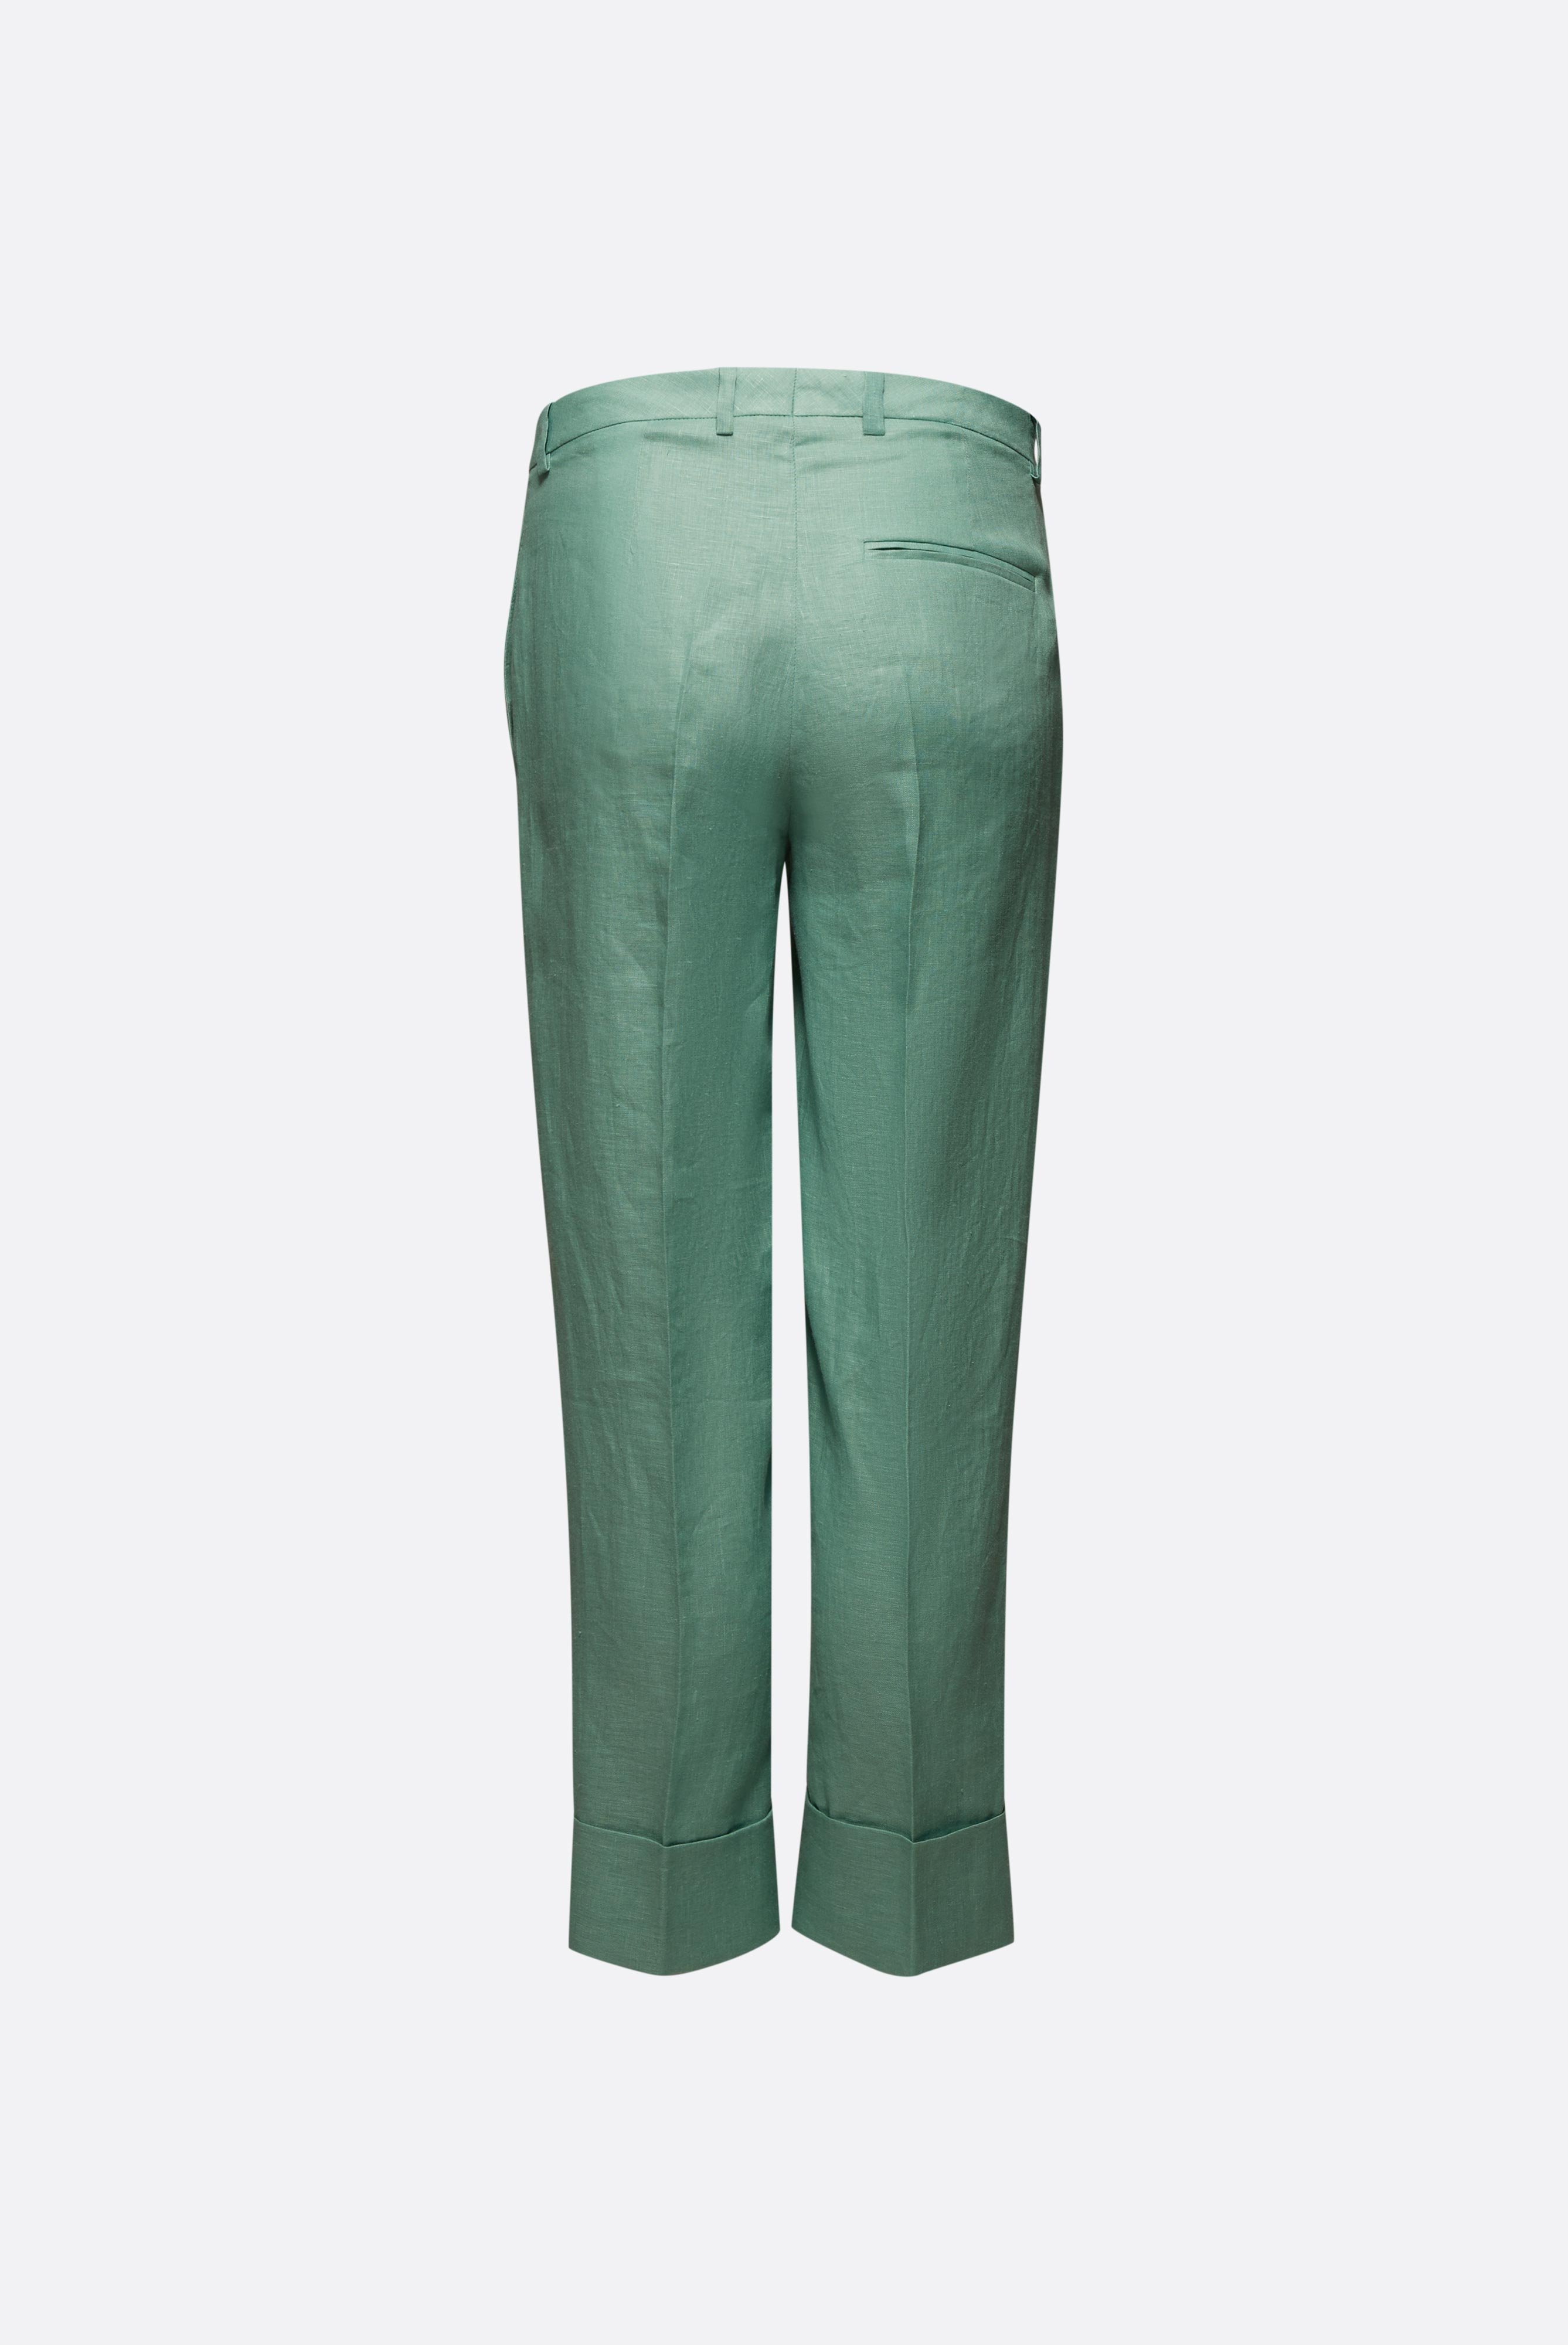 Jeans & Trousers+Linen Pants with Cuff+05.657V..H50555.920.36